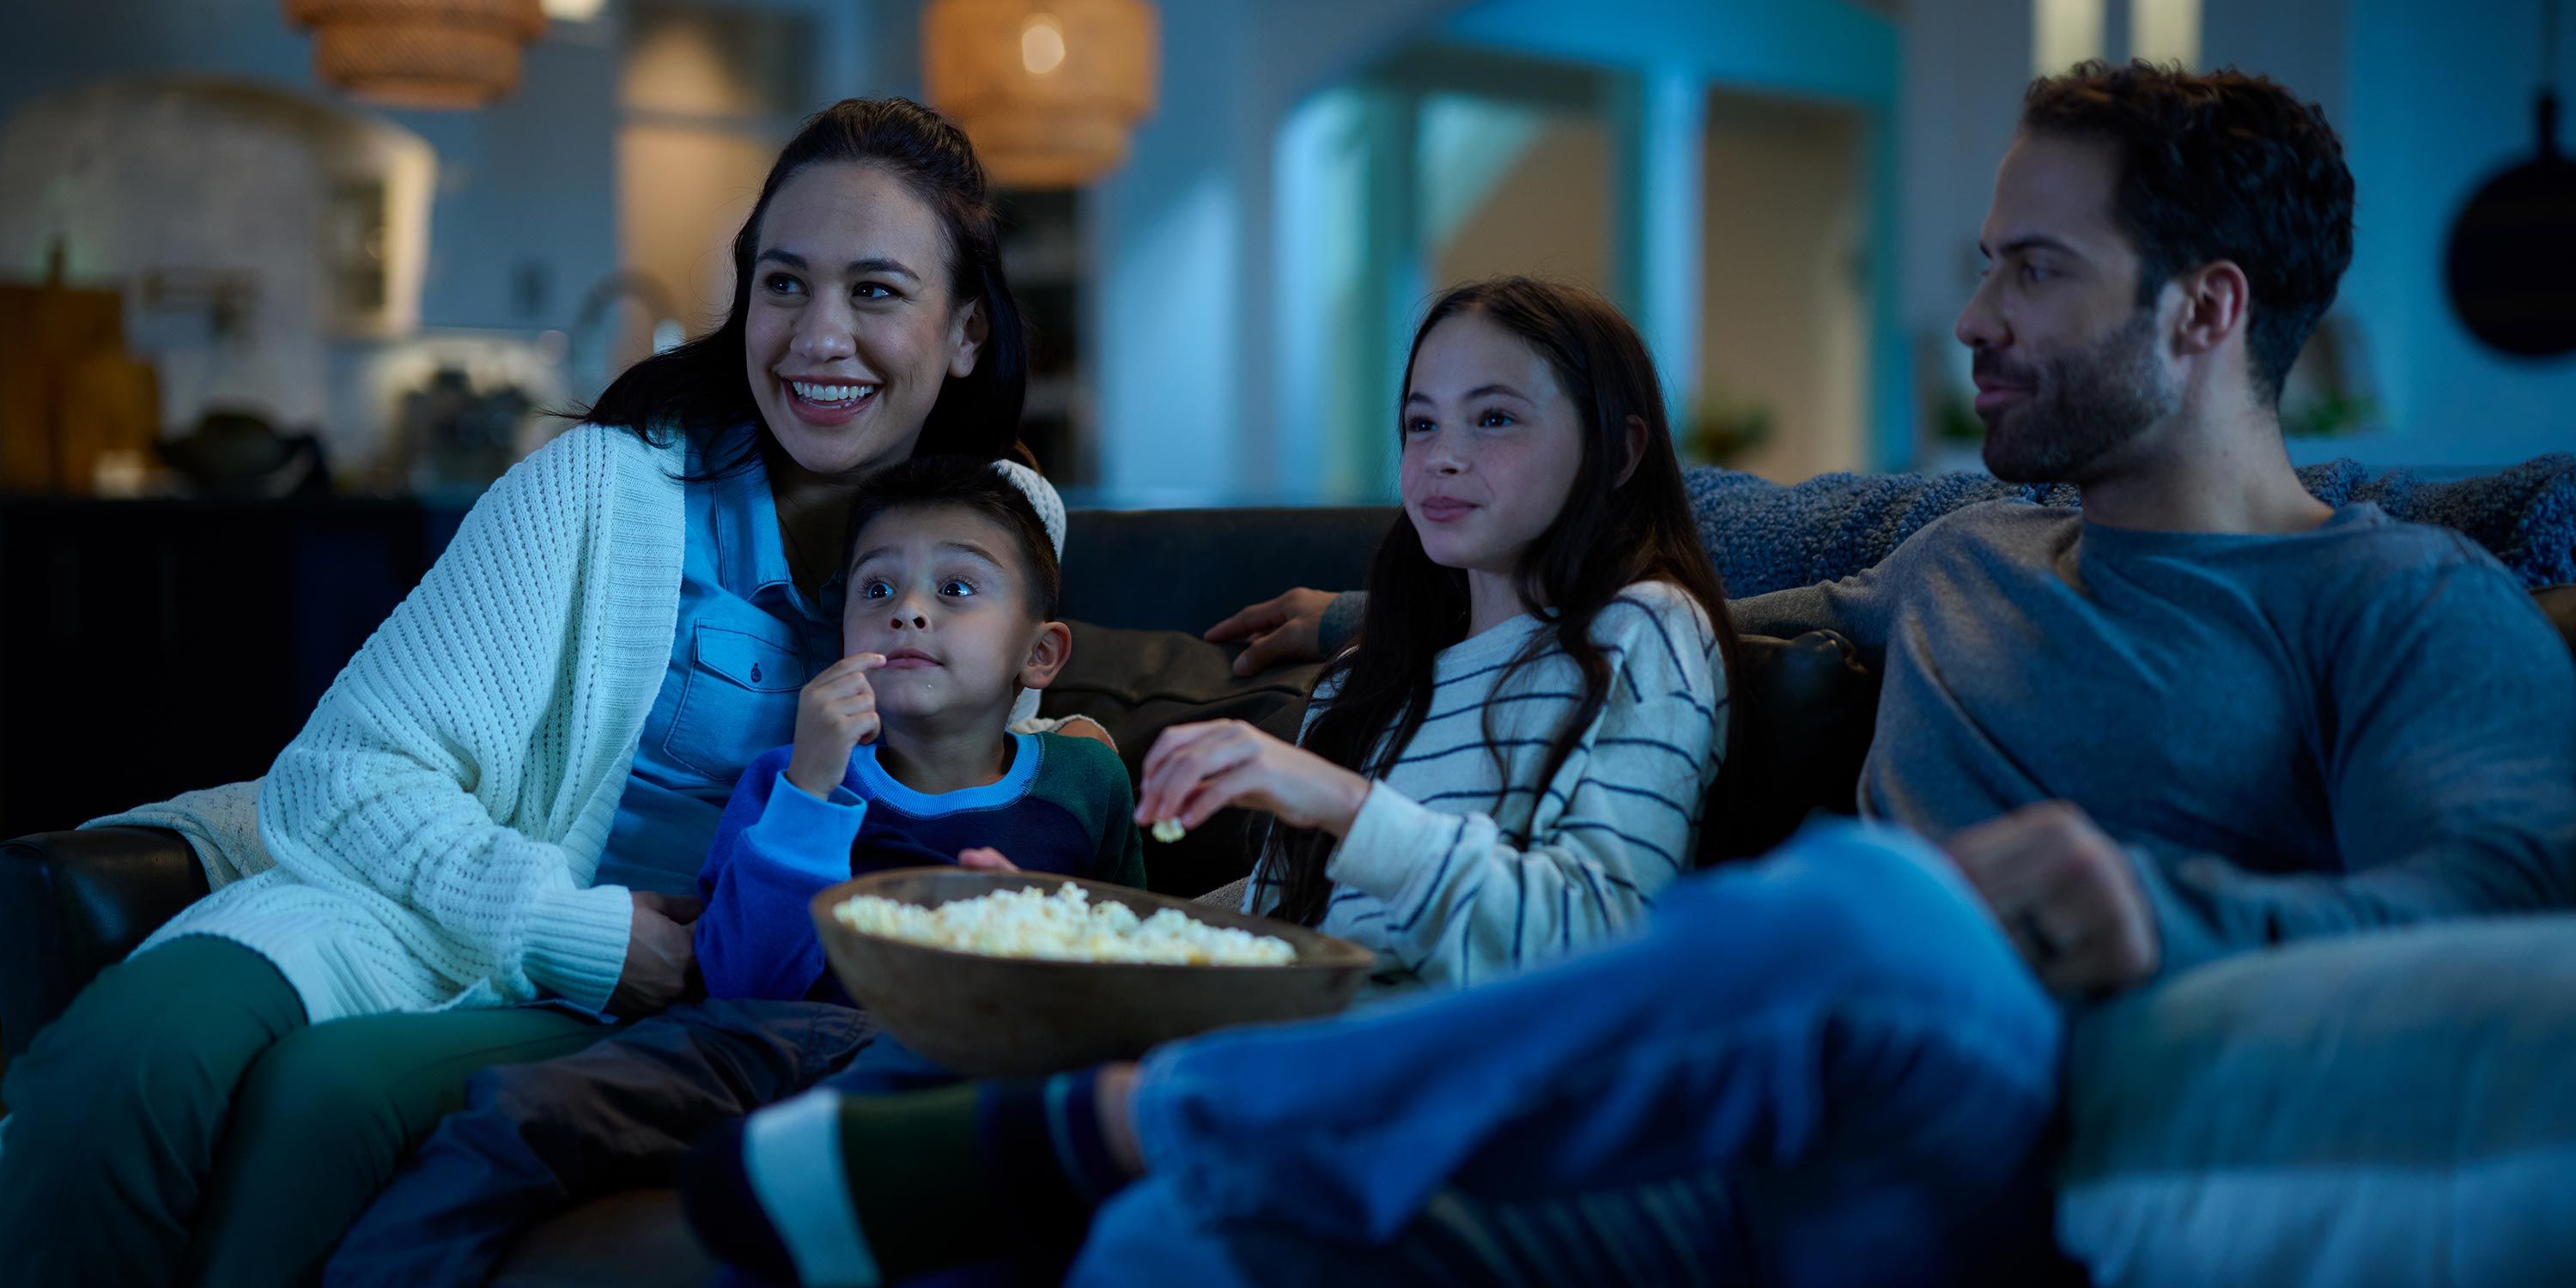 Family enjoying a movie night on the couch with a bowl of popcorn, illuminated by the soft glow of the television.